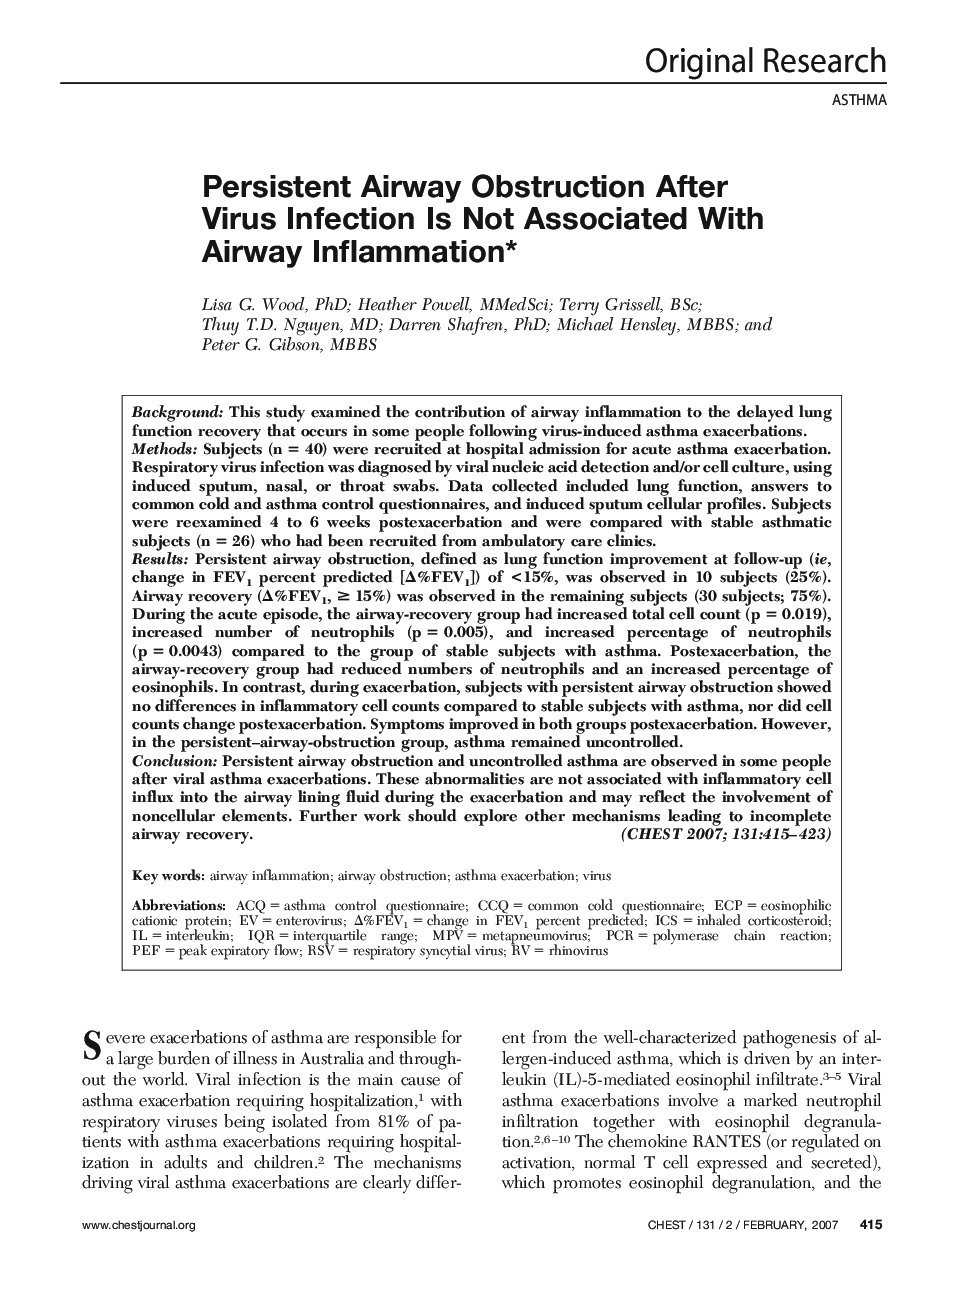 Persistent Airway Obstruction After Virus Infection Is Not Associated With Airway Inflammation 